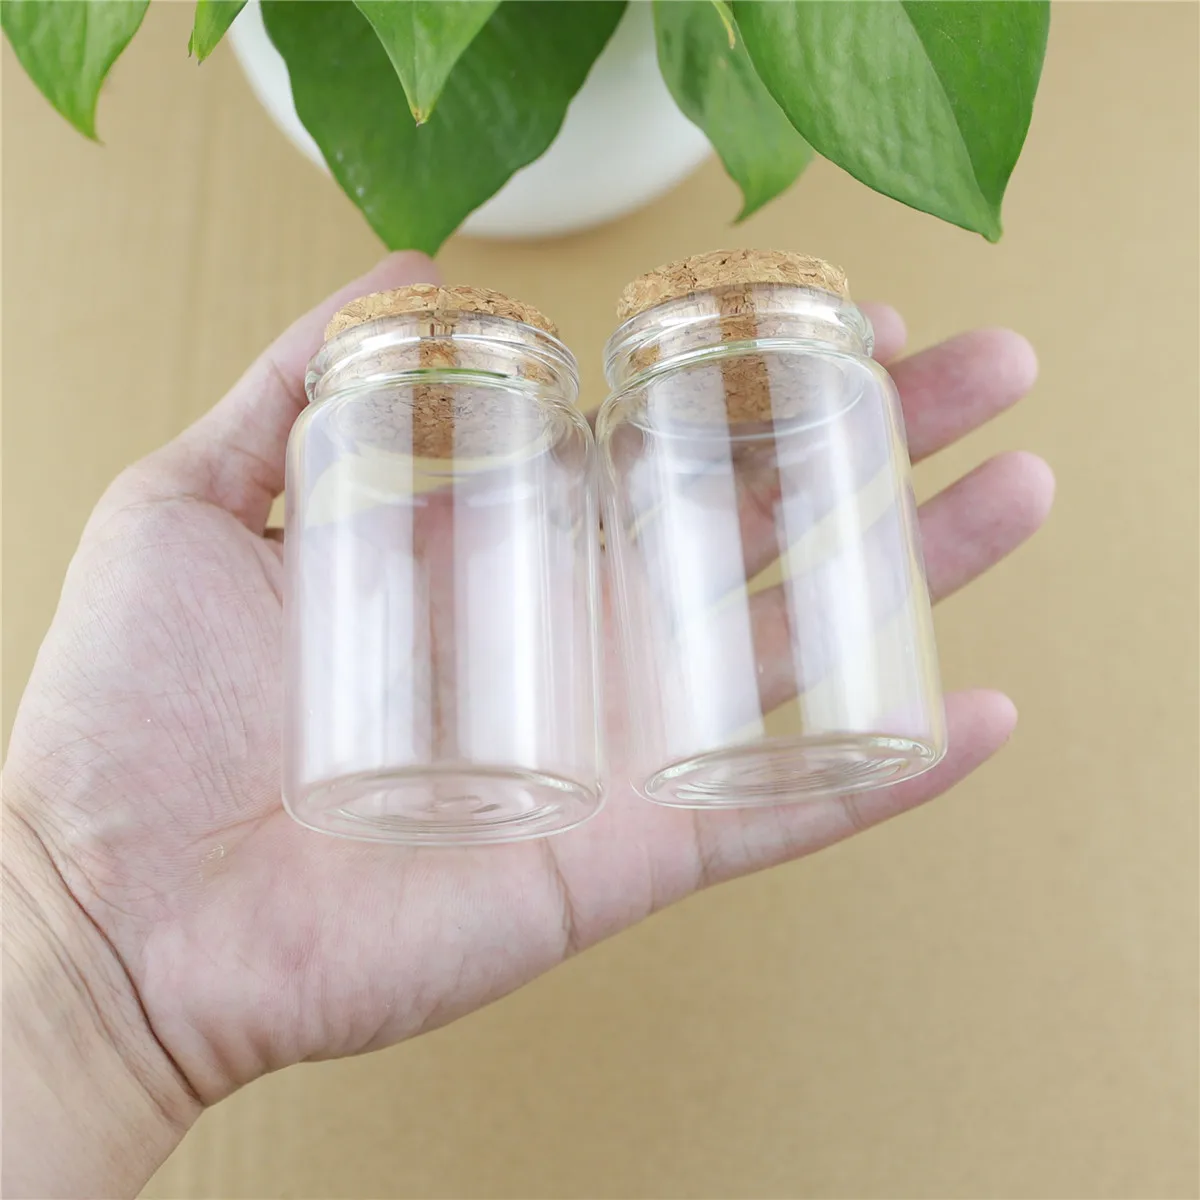 12pcs/lot 47*70mm 80ml Cork Stopper Glass Bottles Spicy Storage Jar Bottle Containers Glass spice Jars Vials DIY Craft